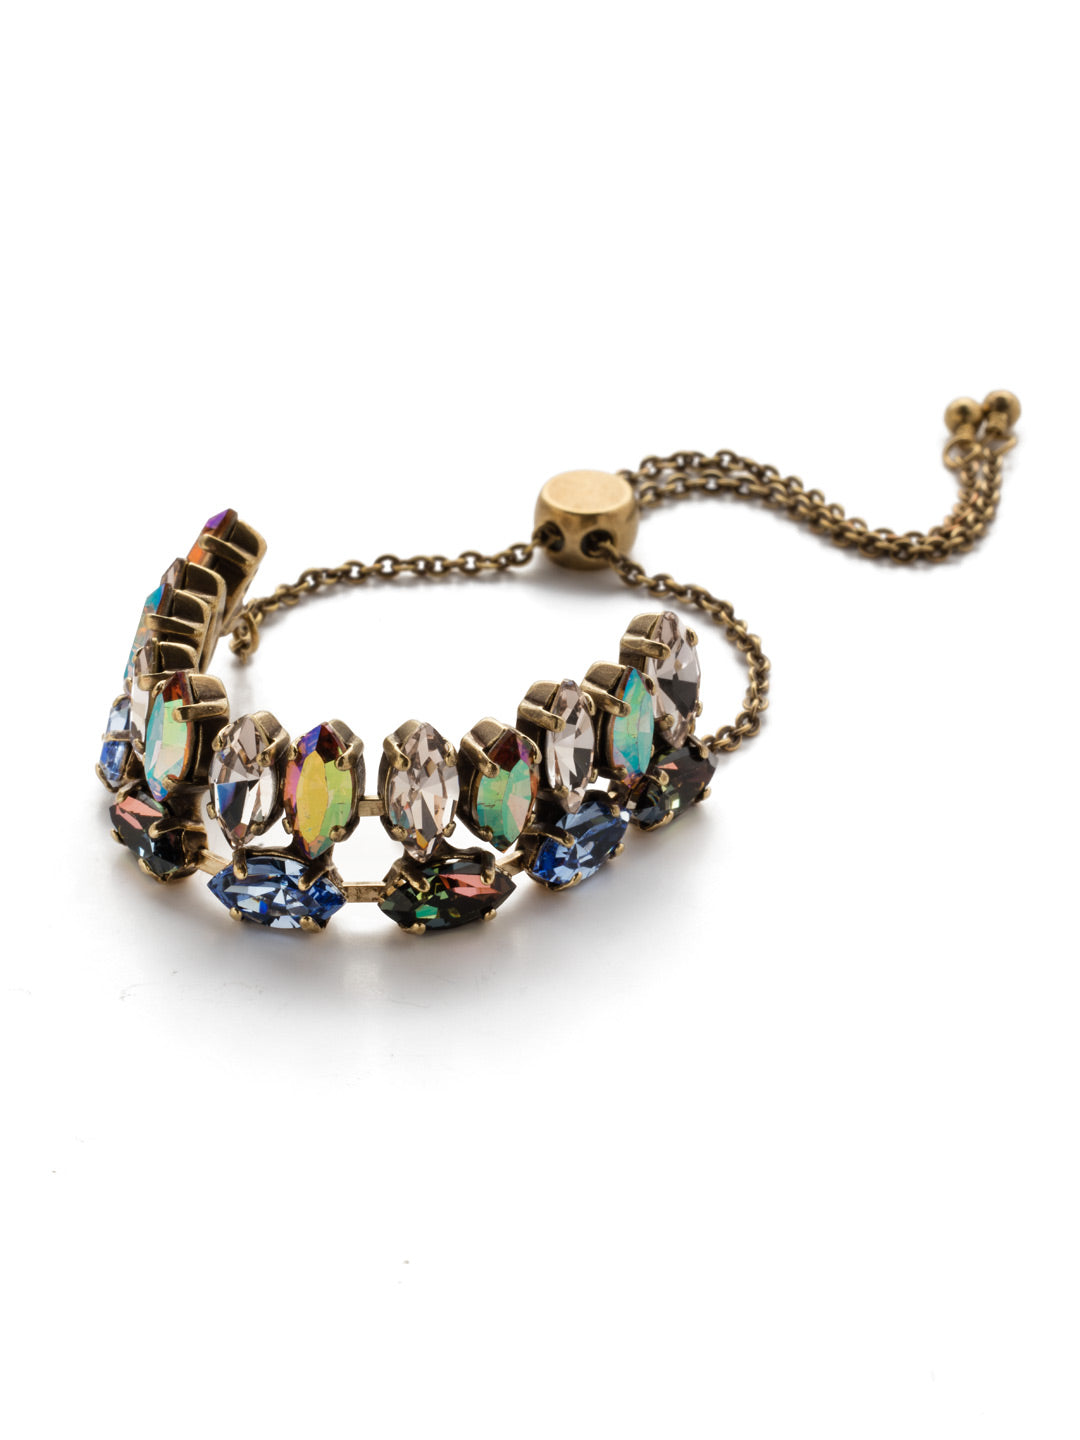 Anita Slider Bracelet - BEP29AGSDE - <p>The Anita Slider Bracelet is boldly beautiful. Its double-layer of navette stones placed in opposite directions offers some serious crystal sparkle. From Sorrelli's Selvedge Denim collection in our Antique Gold-tone finish.</p>